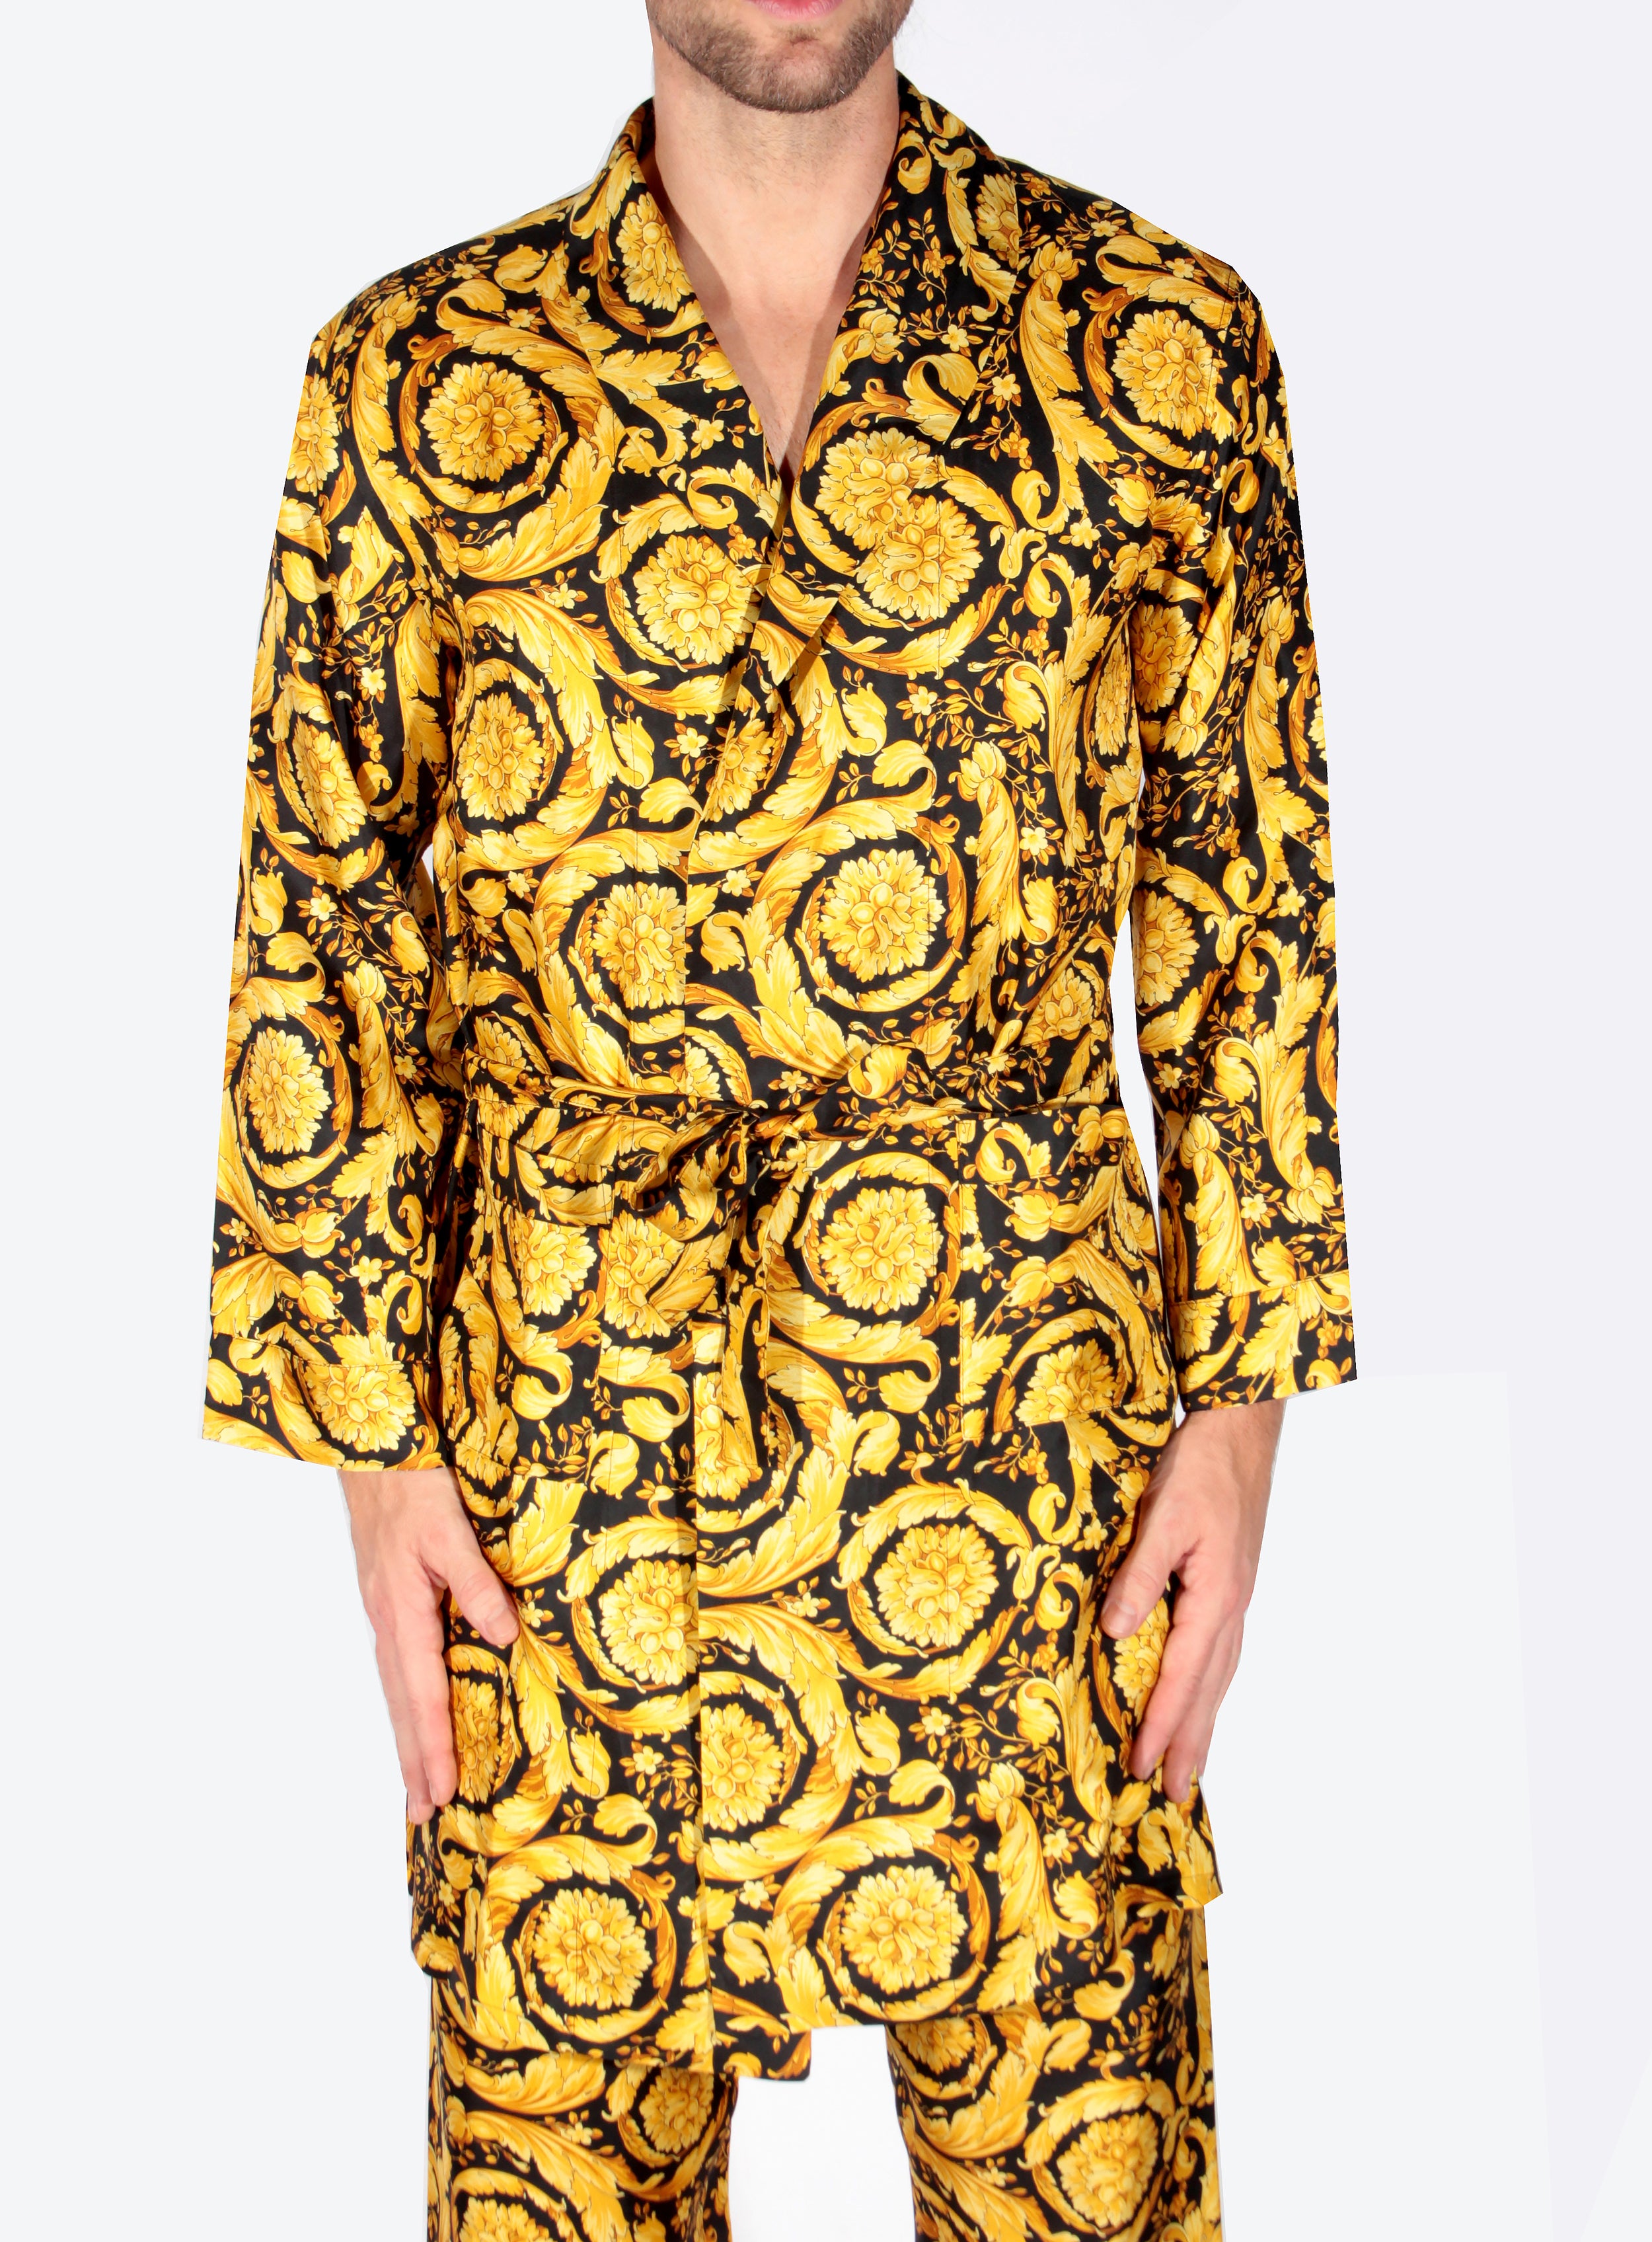 Versace - THE Versace Barocco print. First designed by Gianni